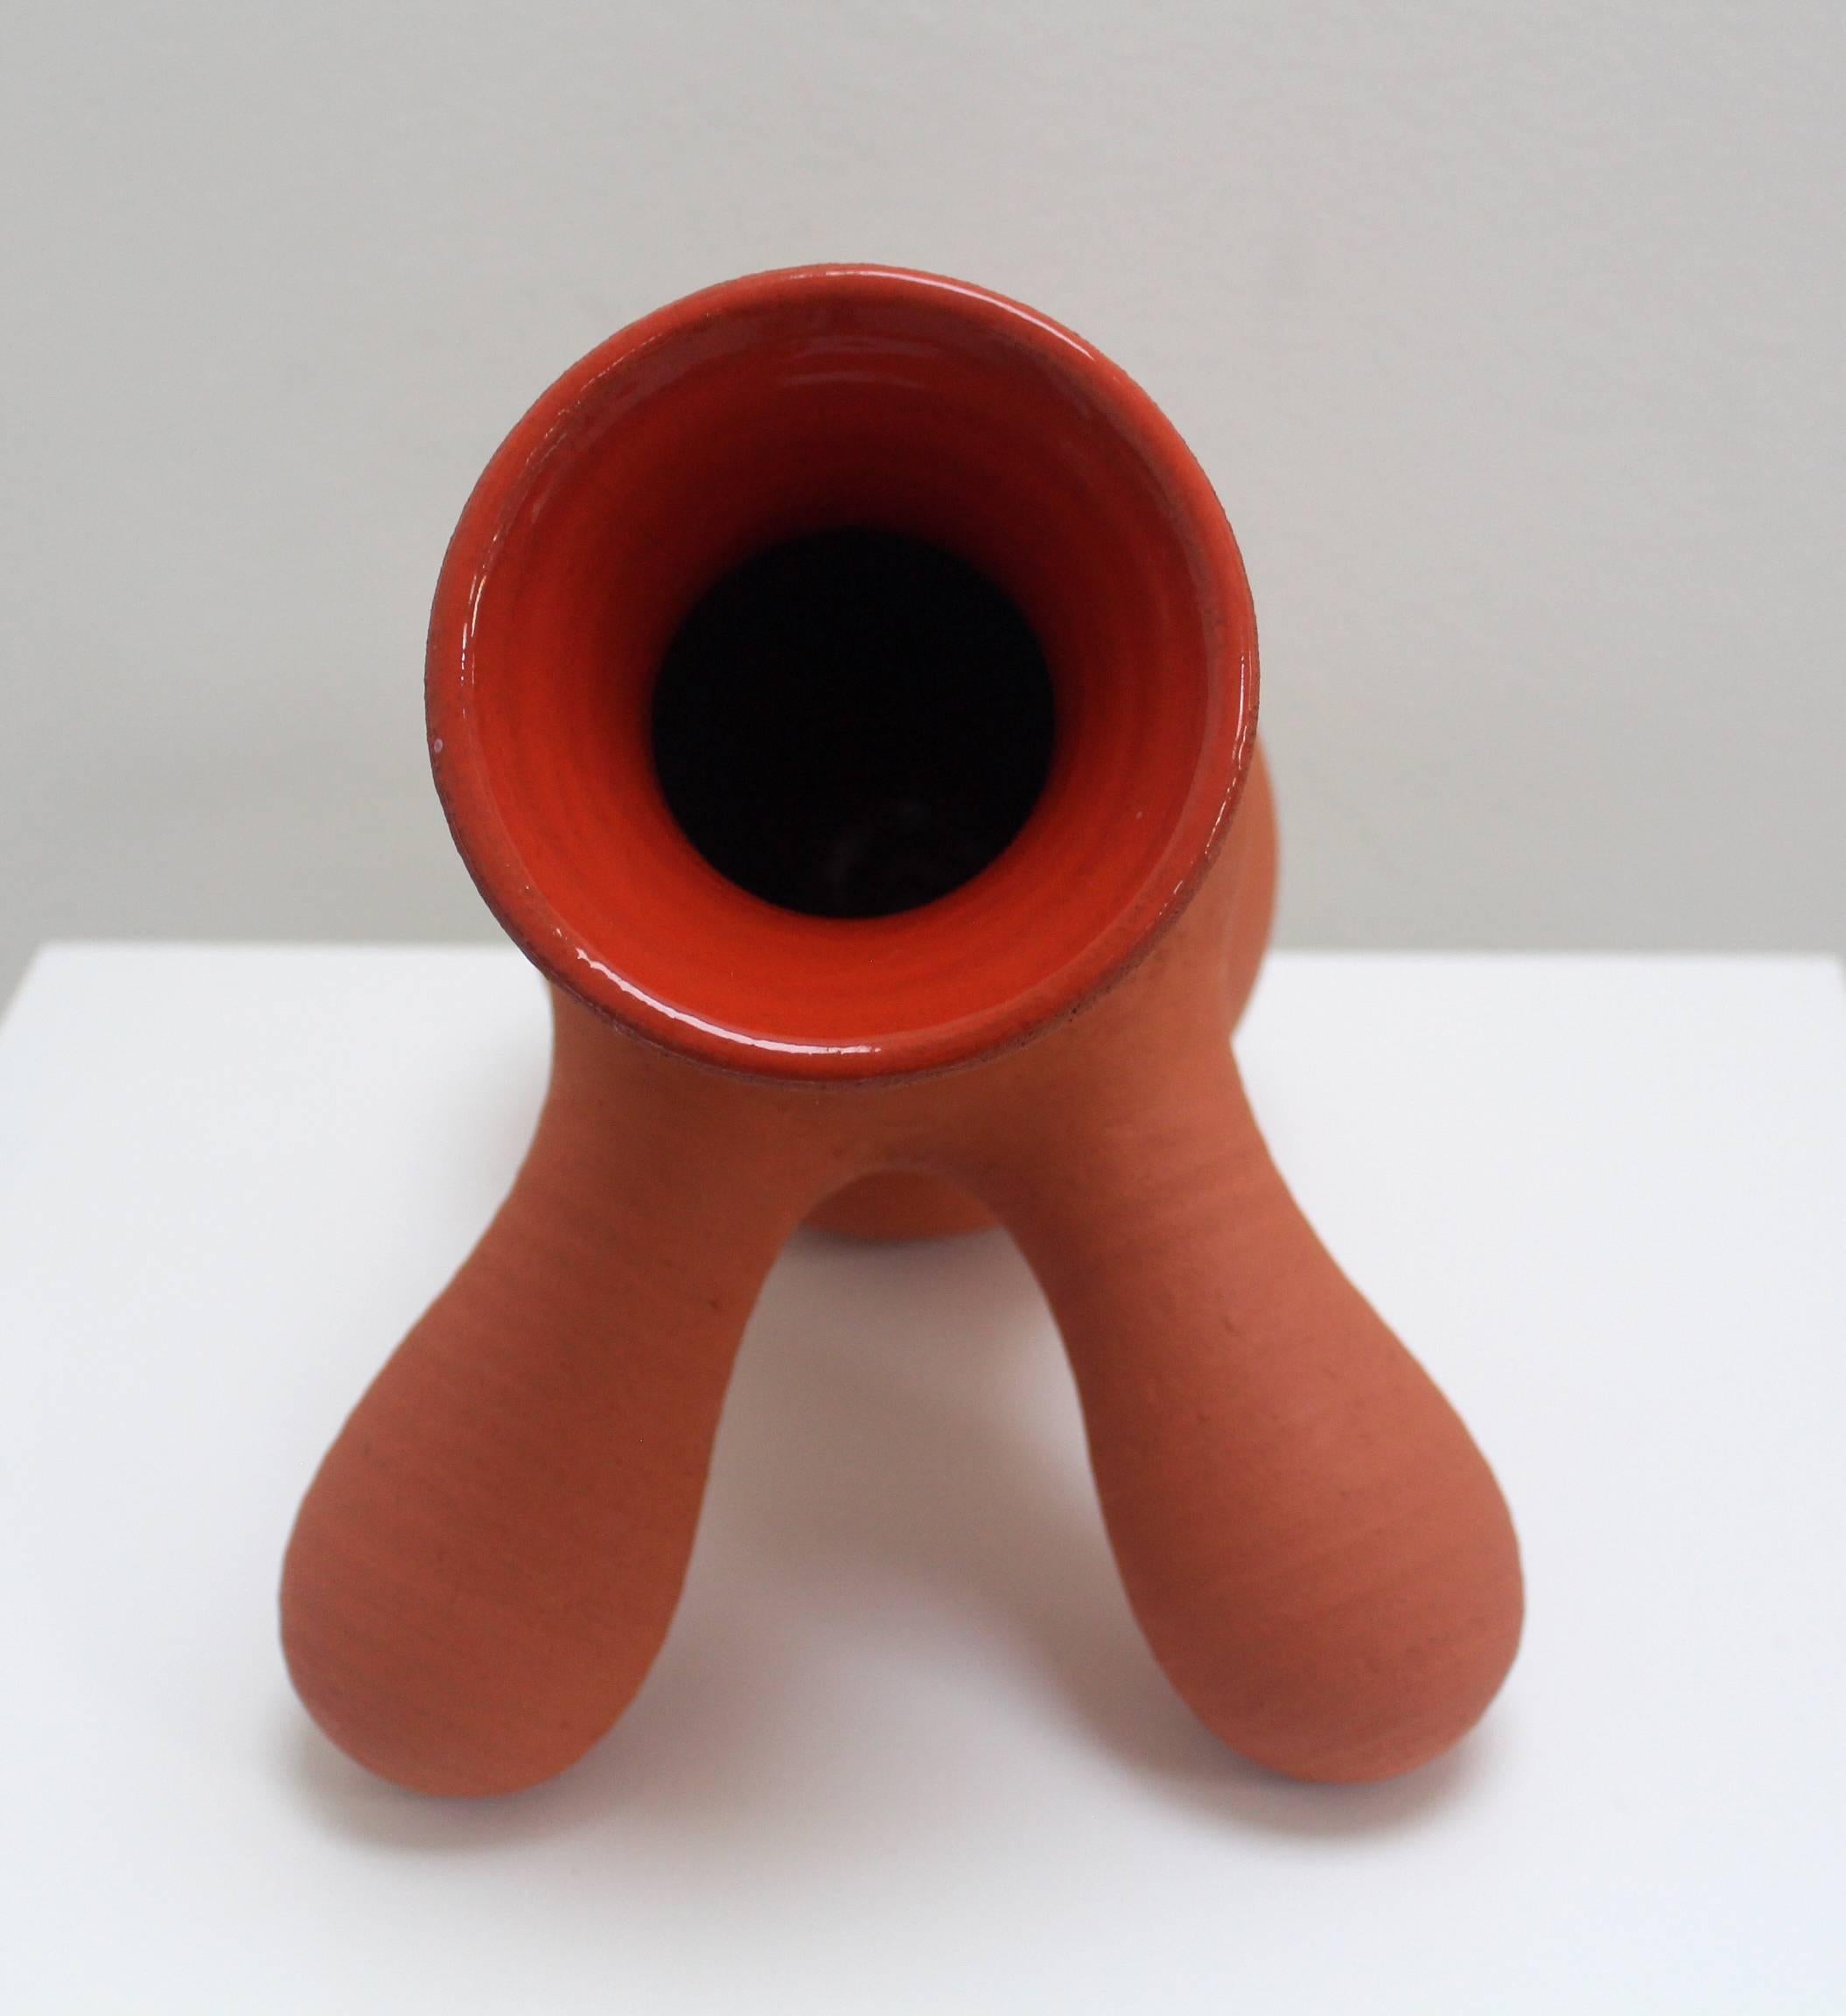 Hand-Crafted Contemporary Handthrown Ceramic Sculptural Pot by Danish Designer Ole Jensen For Sale